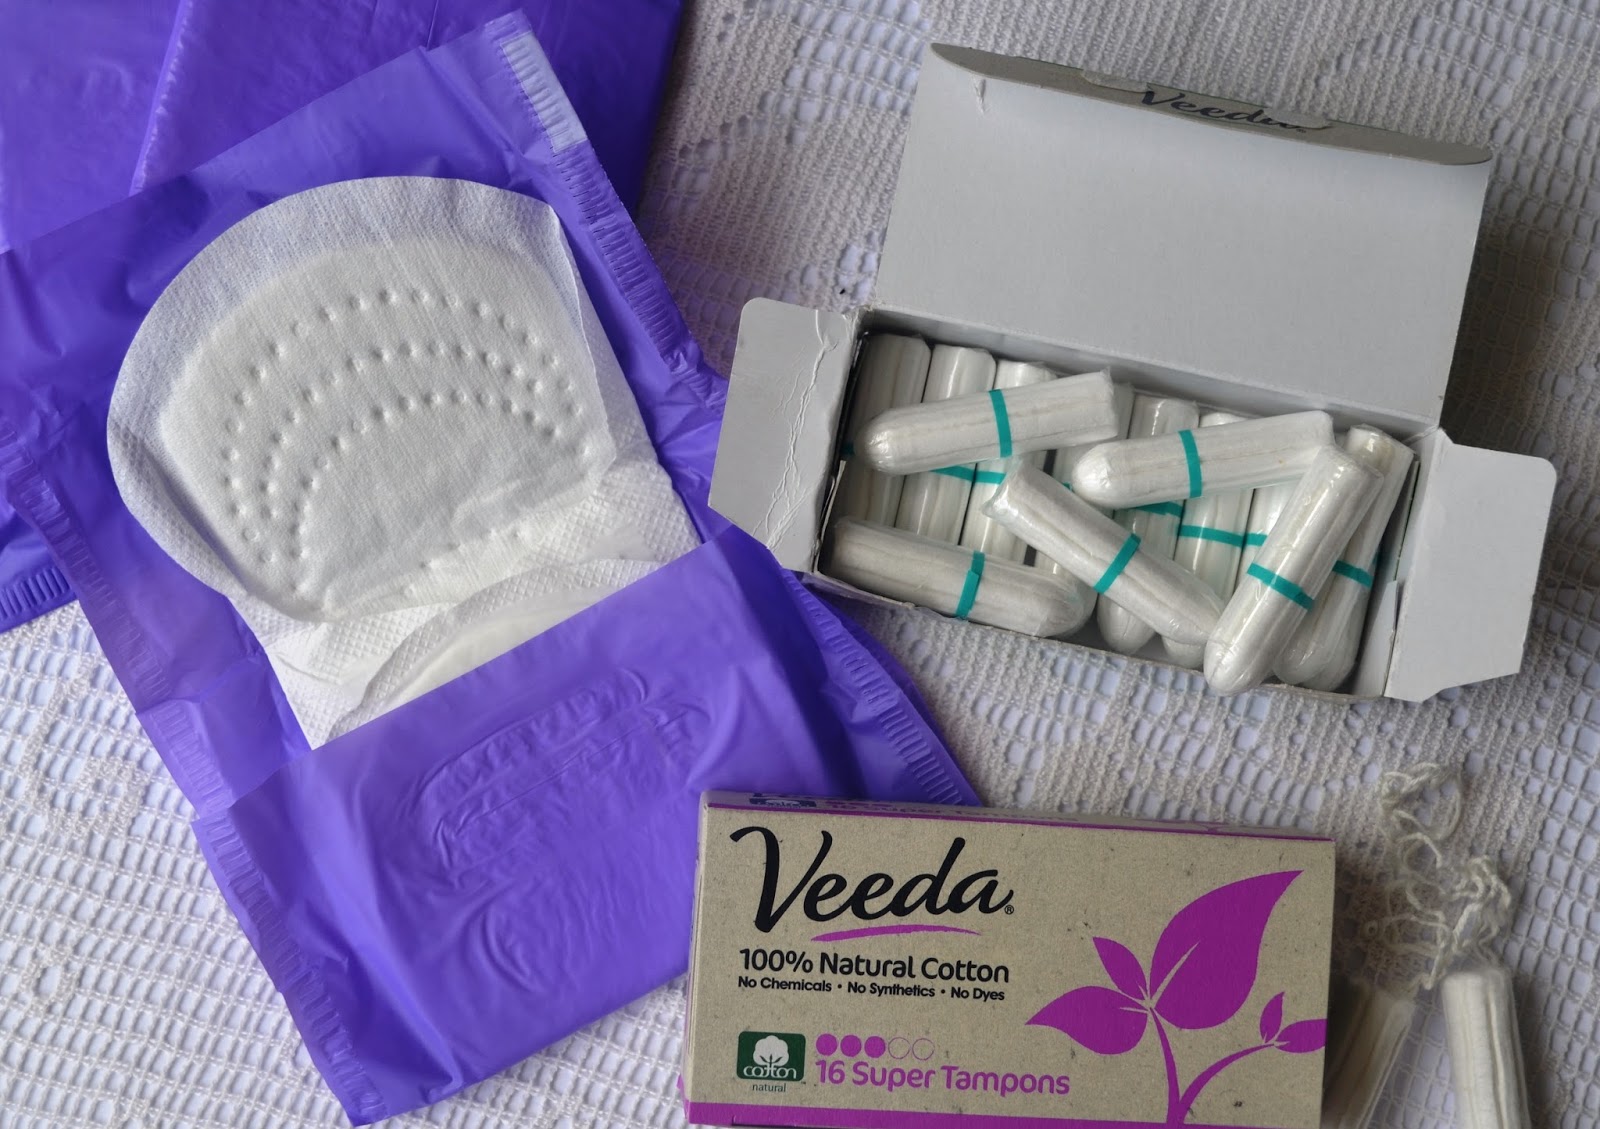 Veeda Natural Cotton Towels and Tampons 